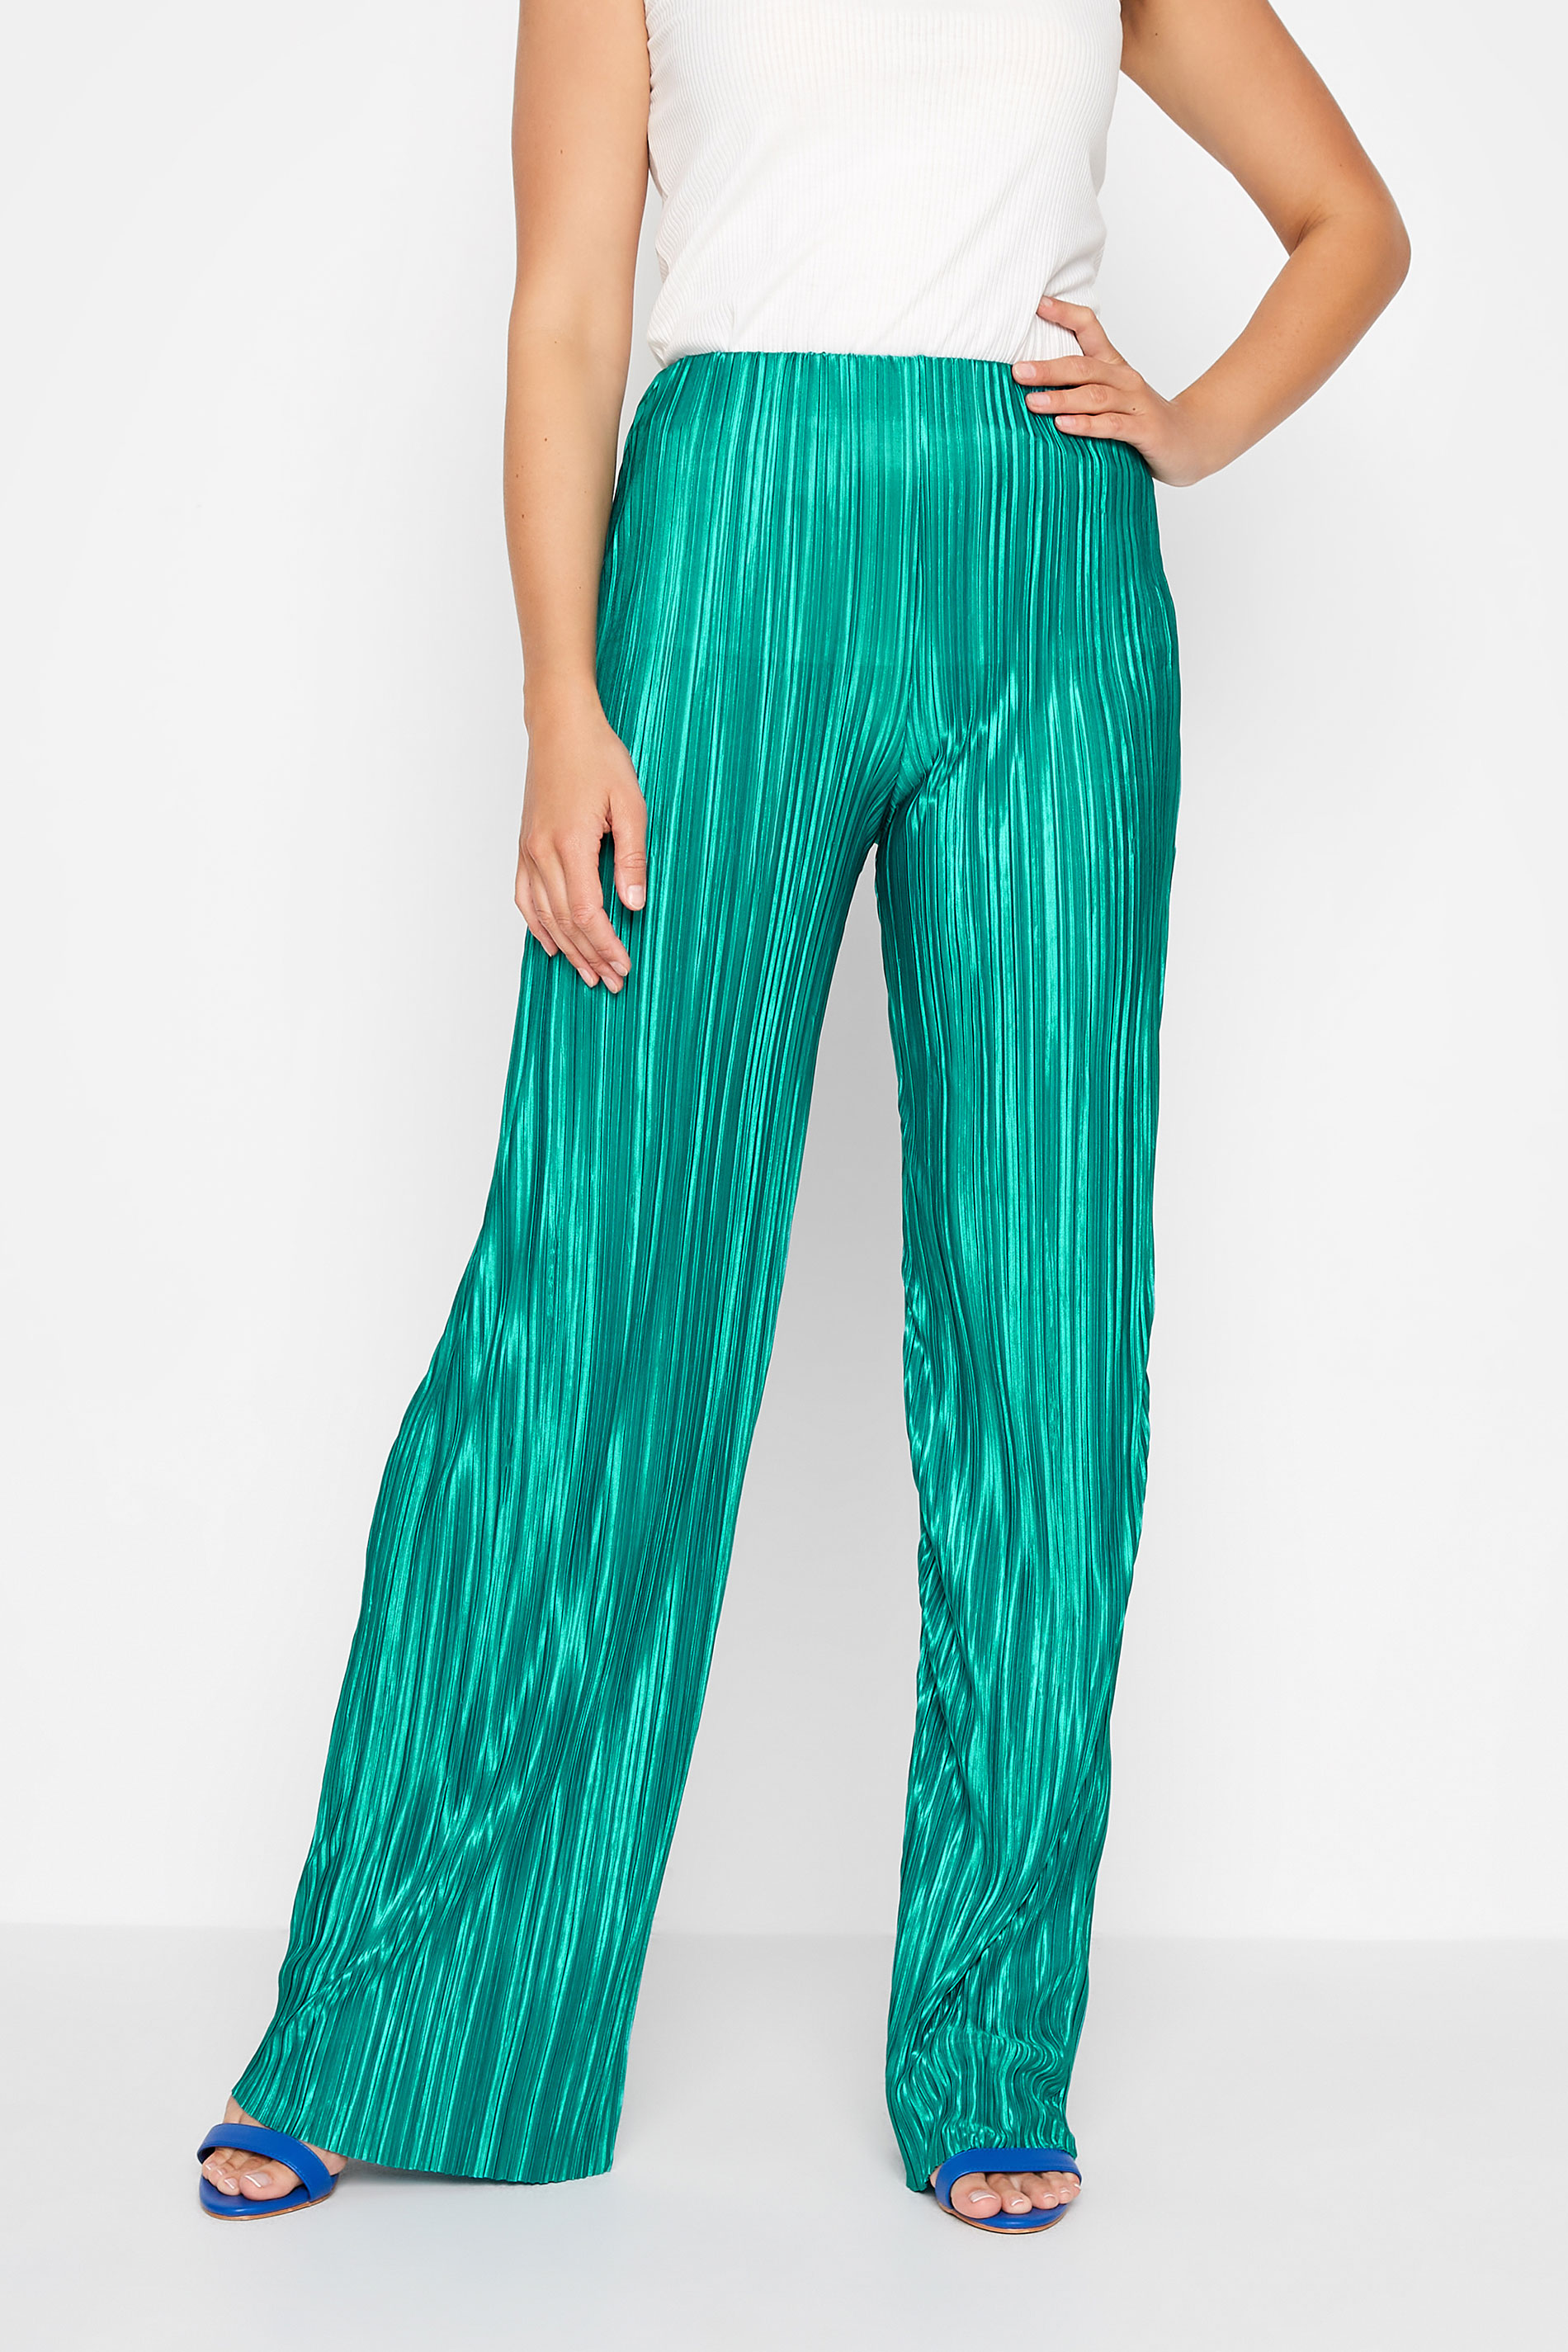 LTS Tall Turquoise Blue Plisse Wide Leg Trousers | Long Tall Sally 1